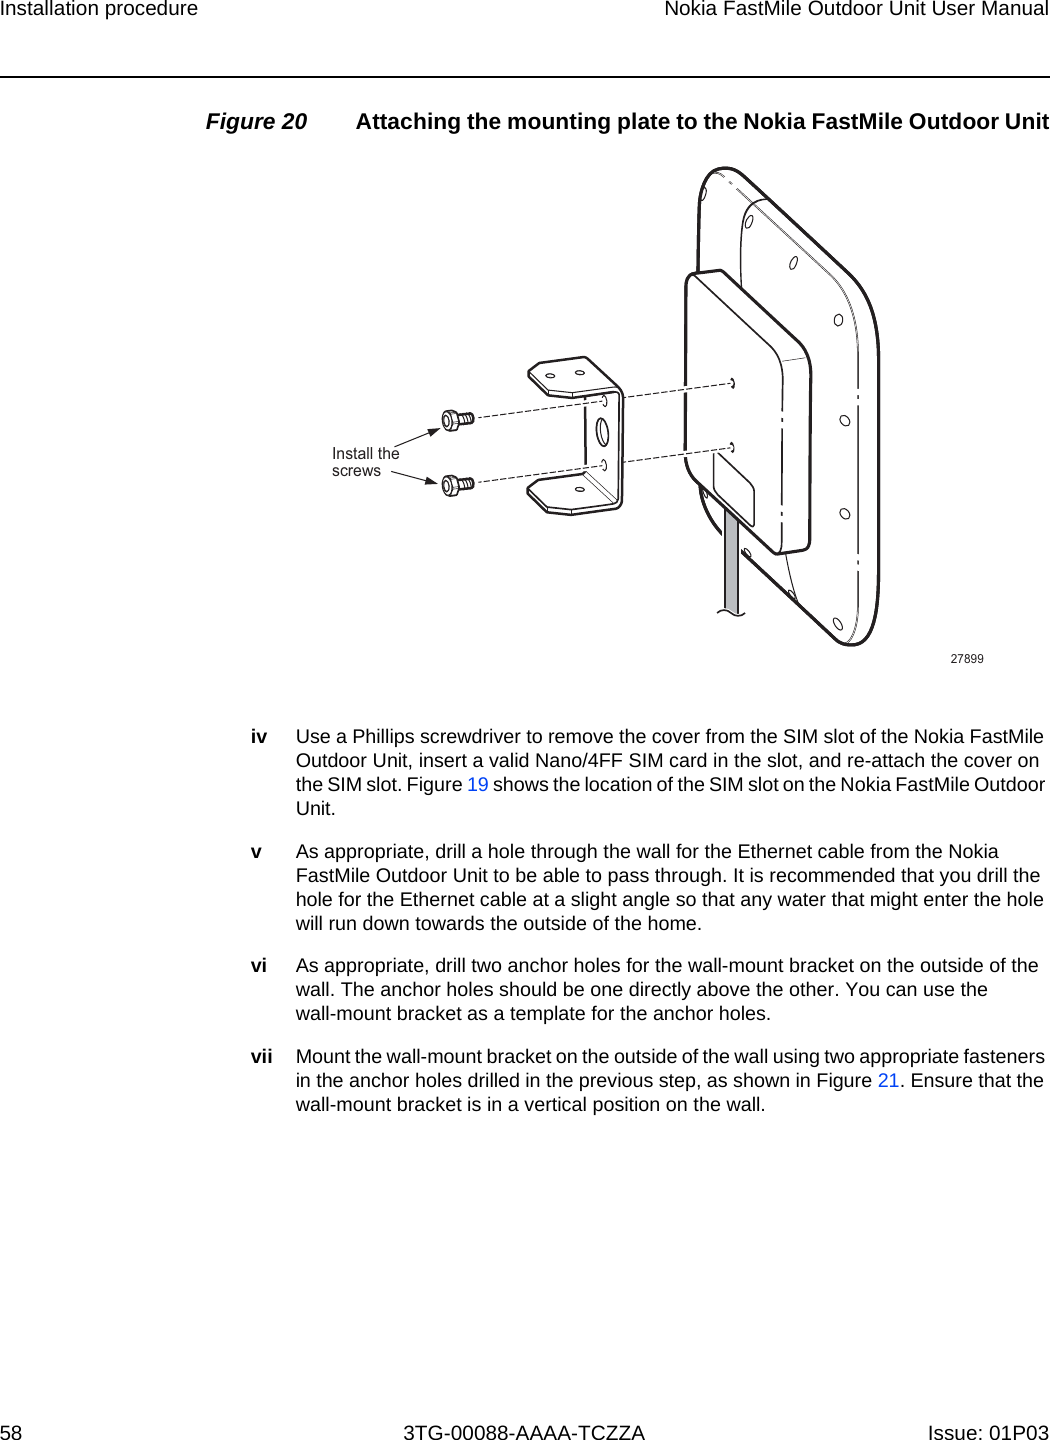 Page 53 of Nokia Bell 34003800FM20 FastMile Compact User Manual Nokia FastMile Outdoor Unit